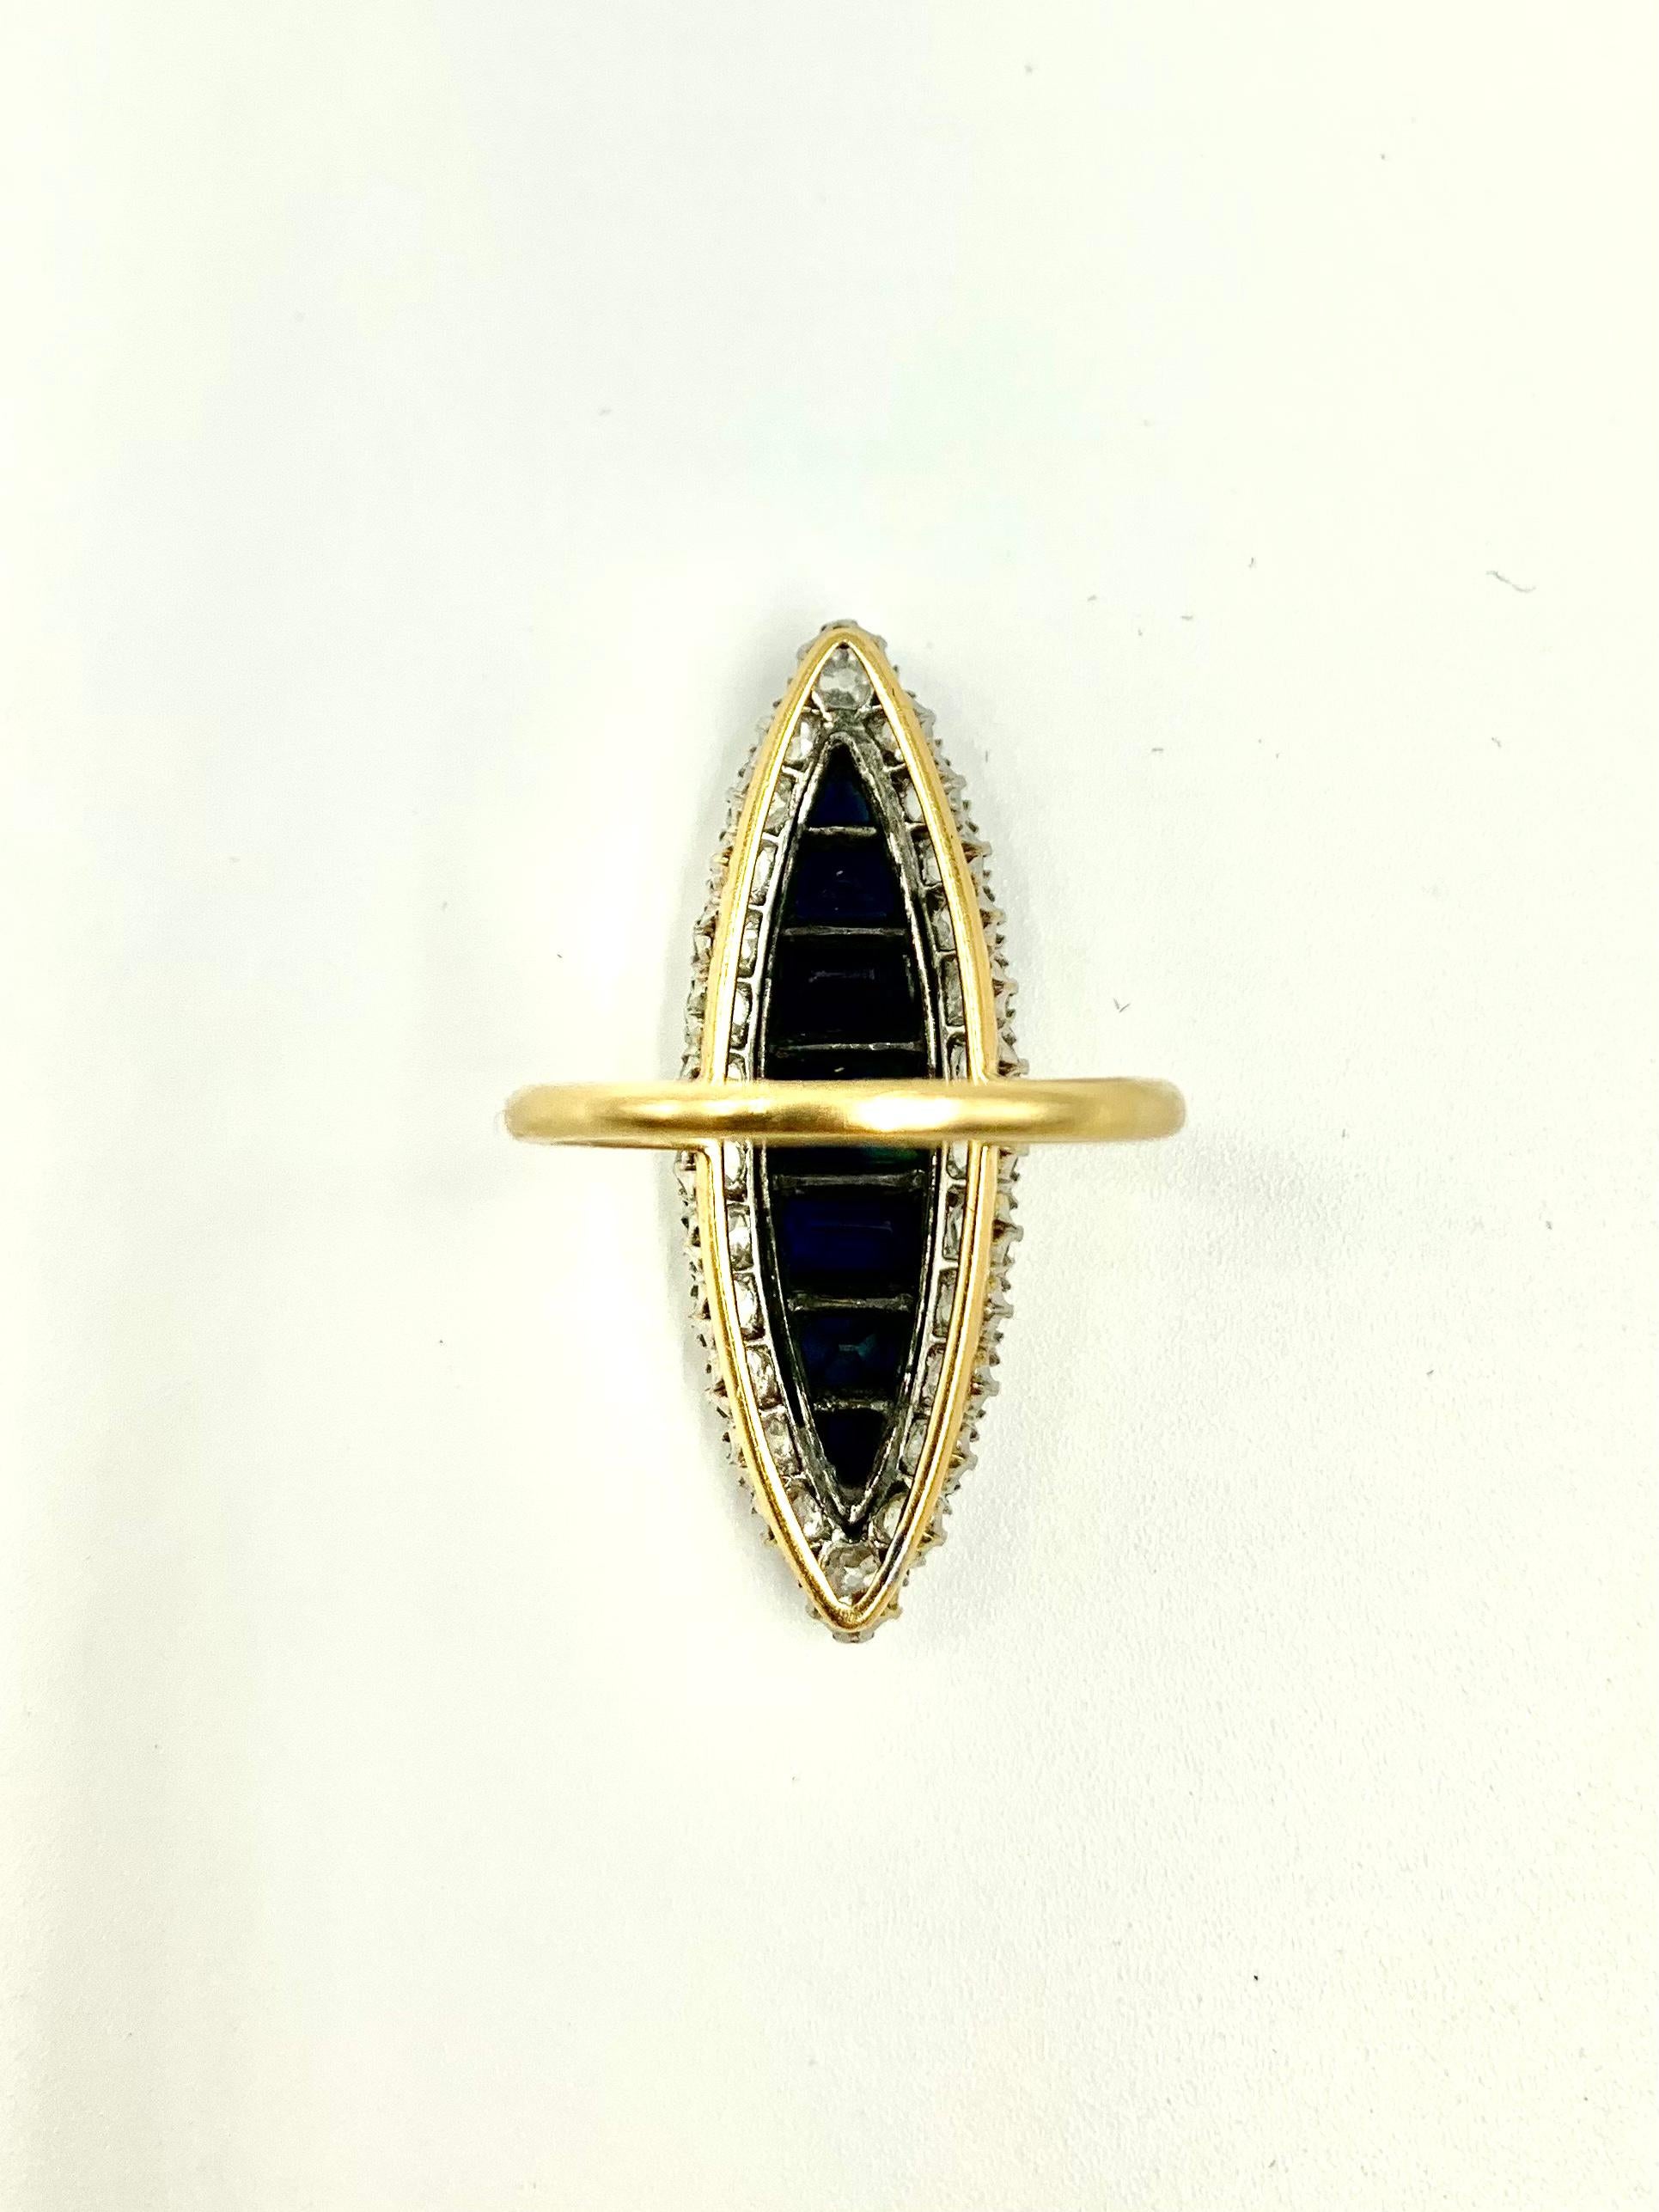 Large Antique Edwardian Diamond, Invisibly Set Sapphire 18k Gold Navette Ring For Sale 8